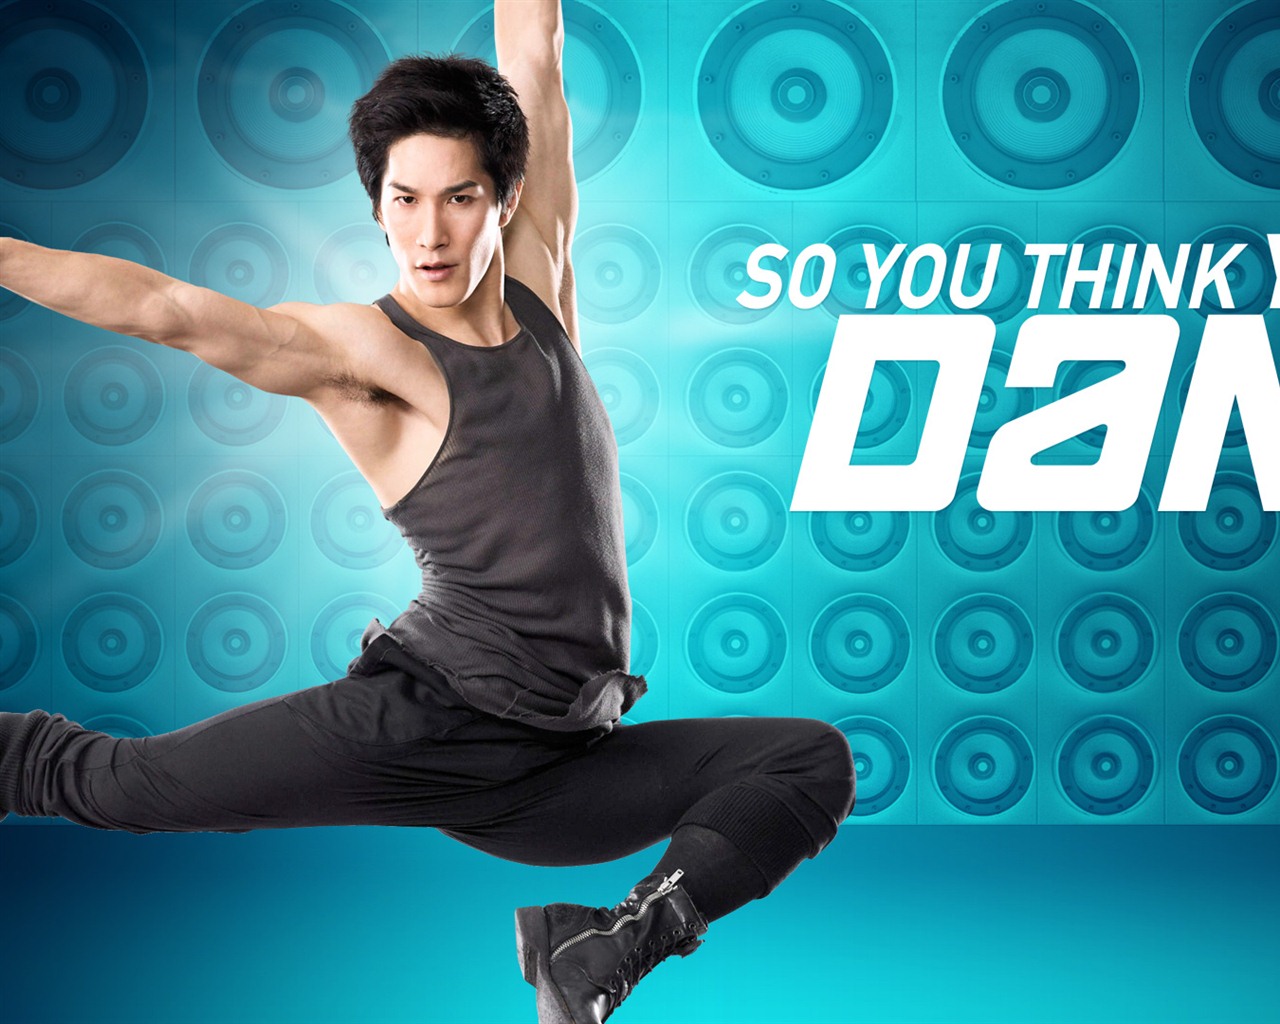 So You Think You Can Dance 舞林争霸 2012高清壁纸8 - 1280x1024